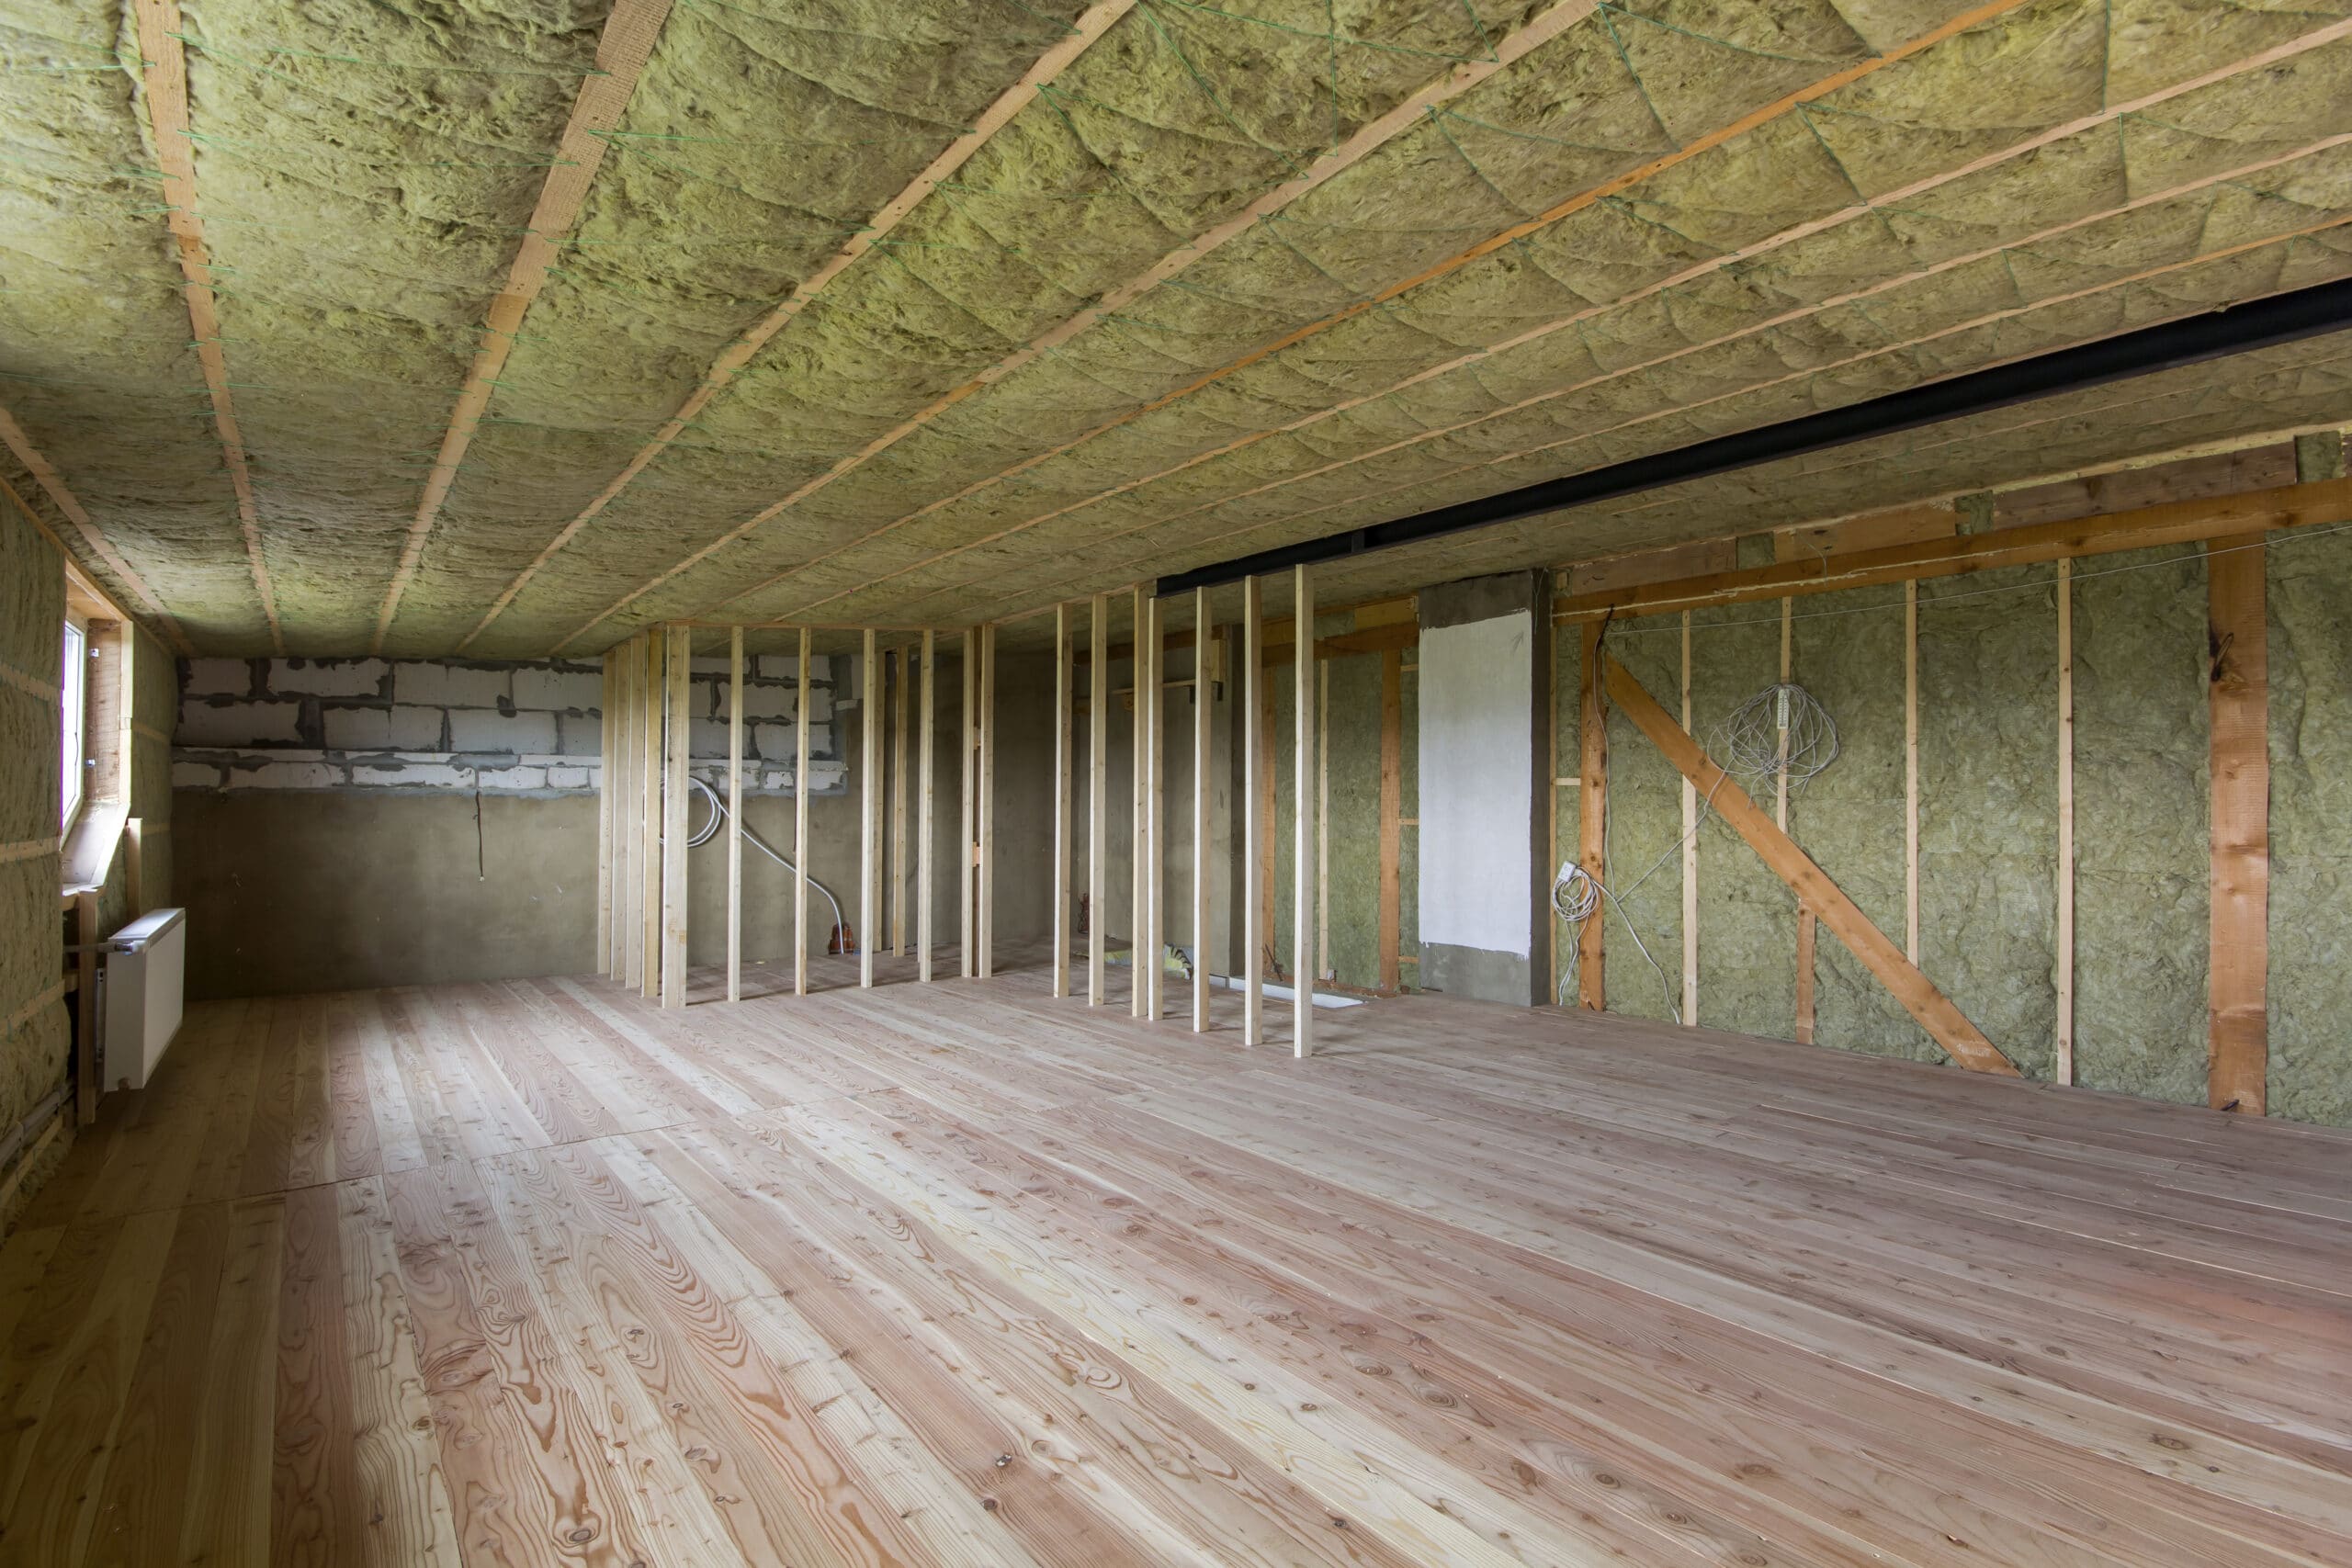 construction and renovation of big spacious empty unfinished attic room with oak floor, walls and ceiling insulated with rock wool and fiber glass for cold barrier and wooden frame for future walls.